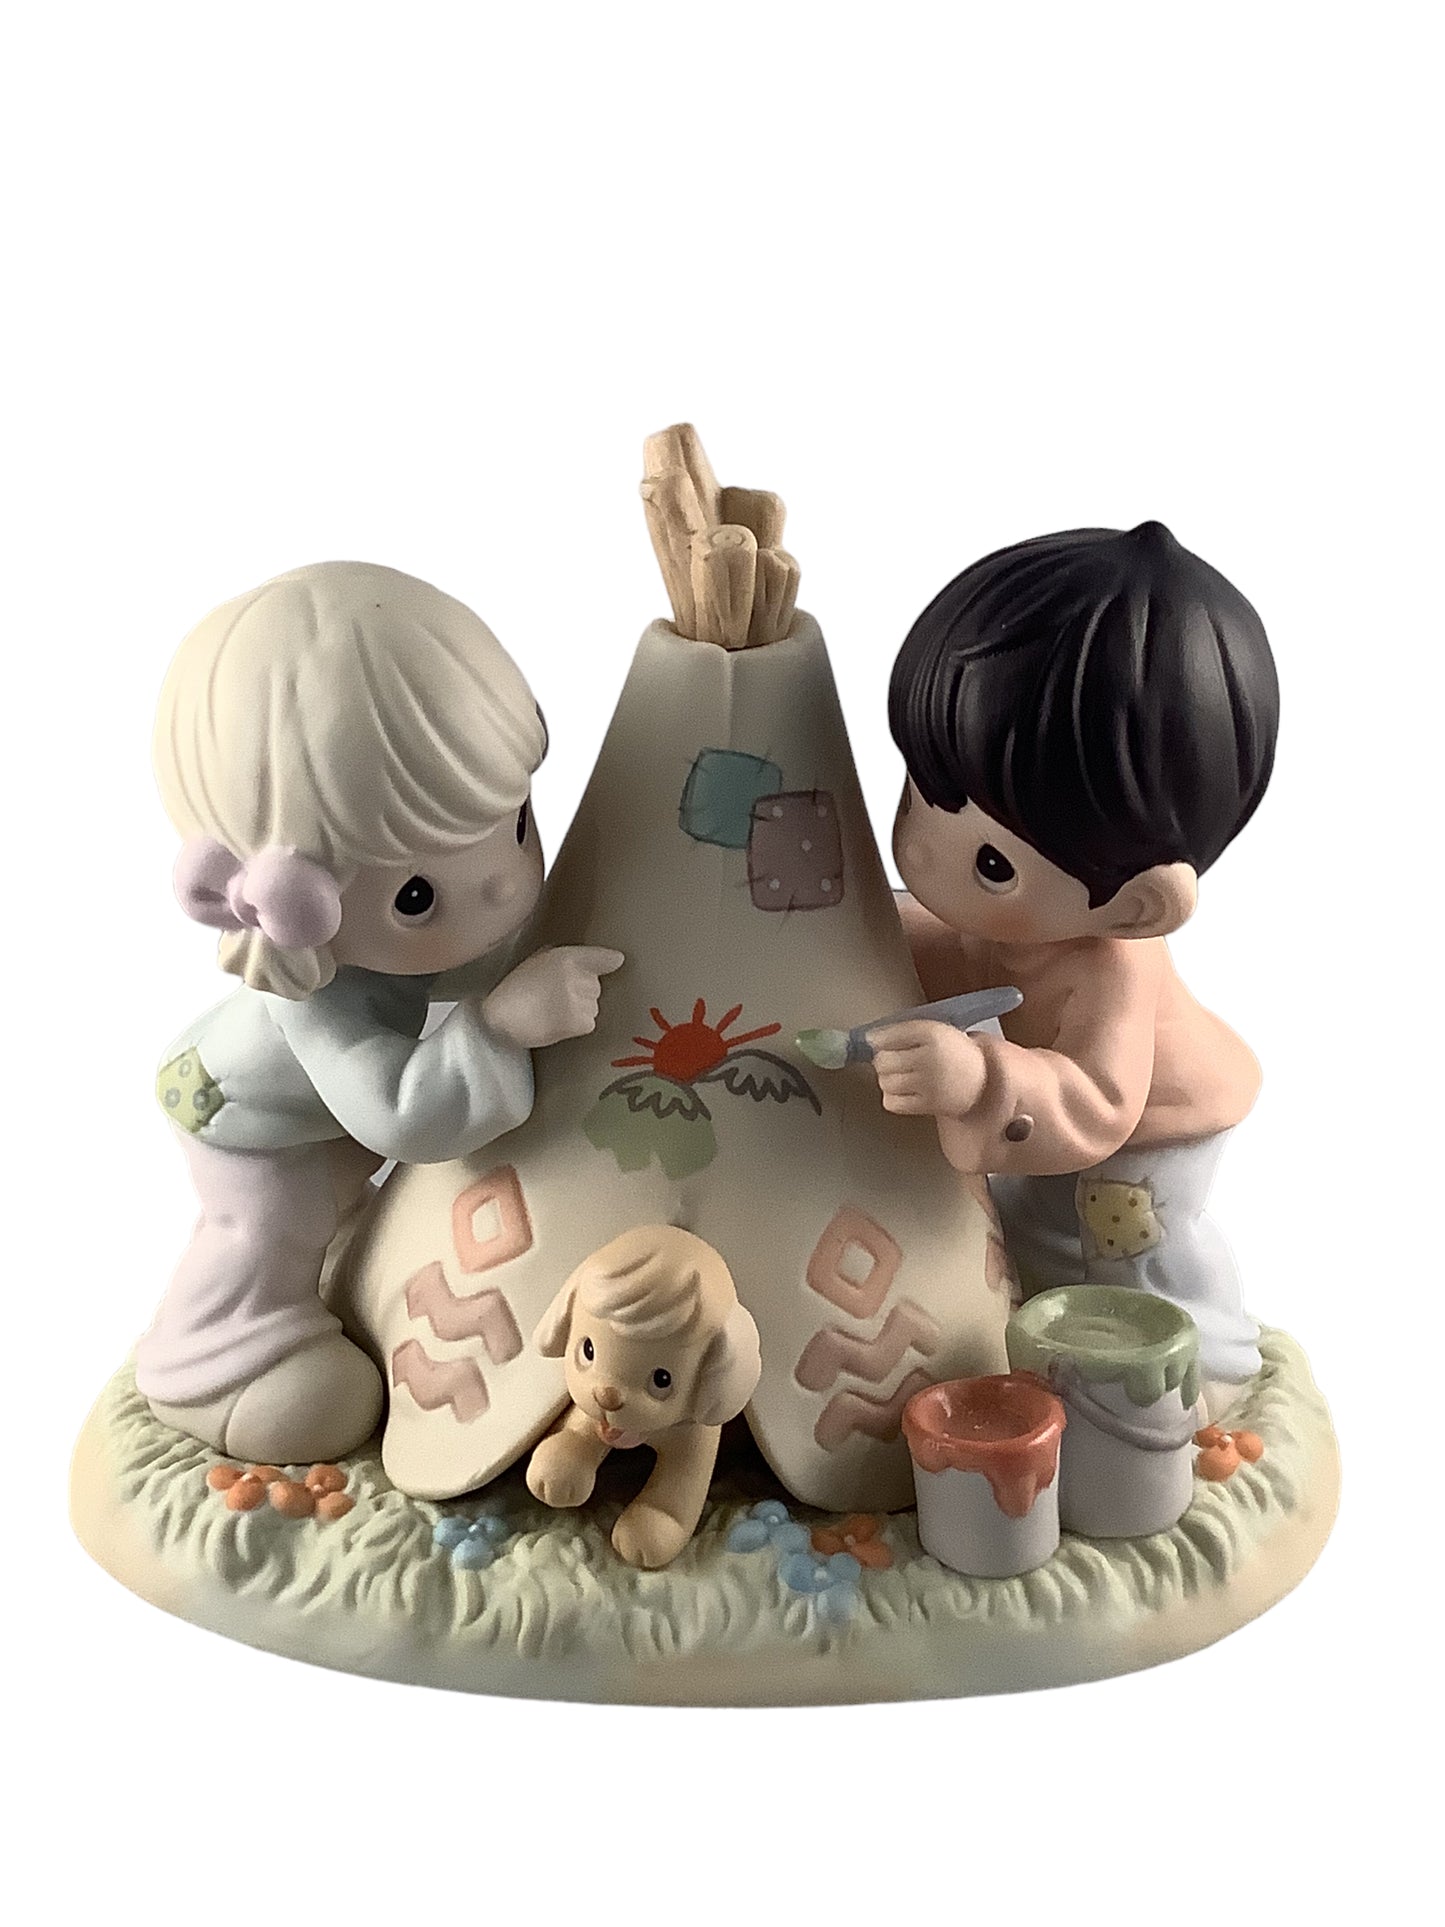 Twogether We Can Move Mountains - Precious Moment Figurine